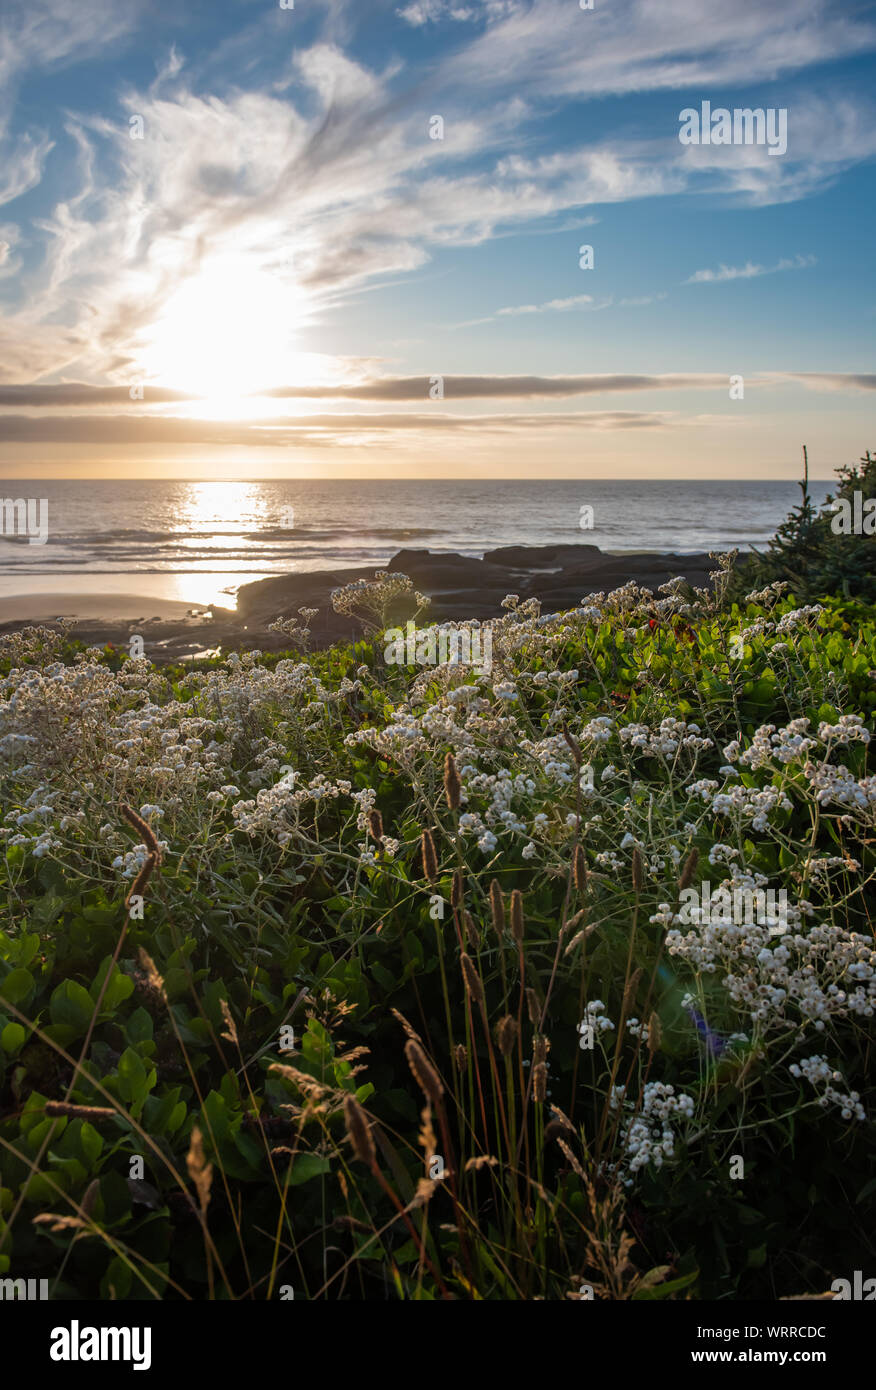 Unspoiled, natural Oregon Coast seascape at sunset, with wildflowers, during golden hour.  In Yachats Oregon. Stock Photo